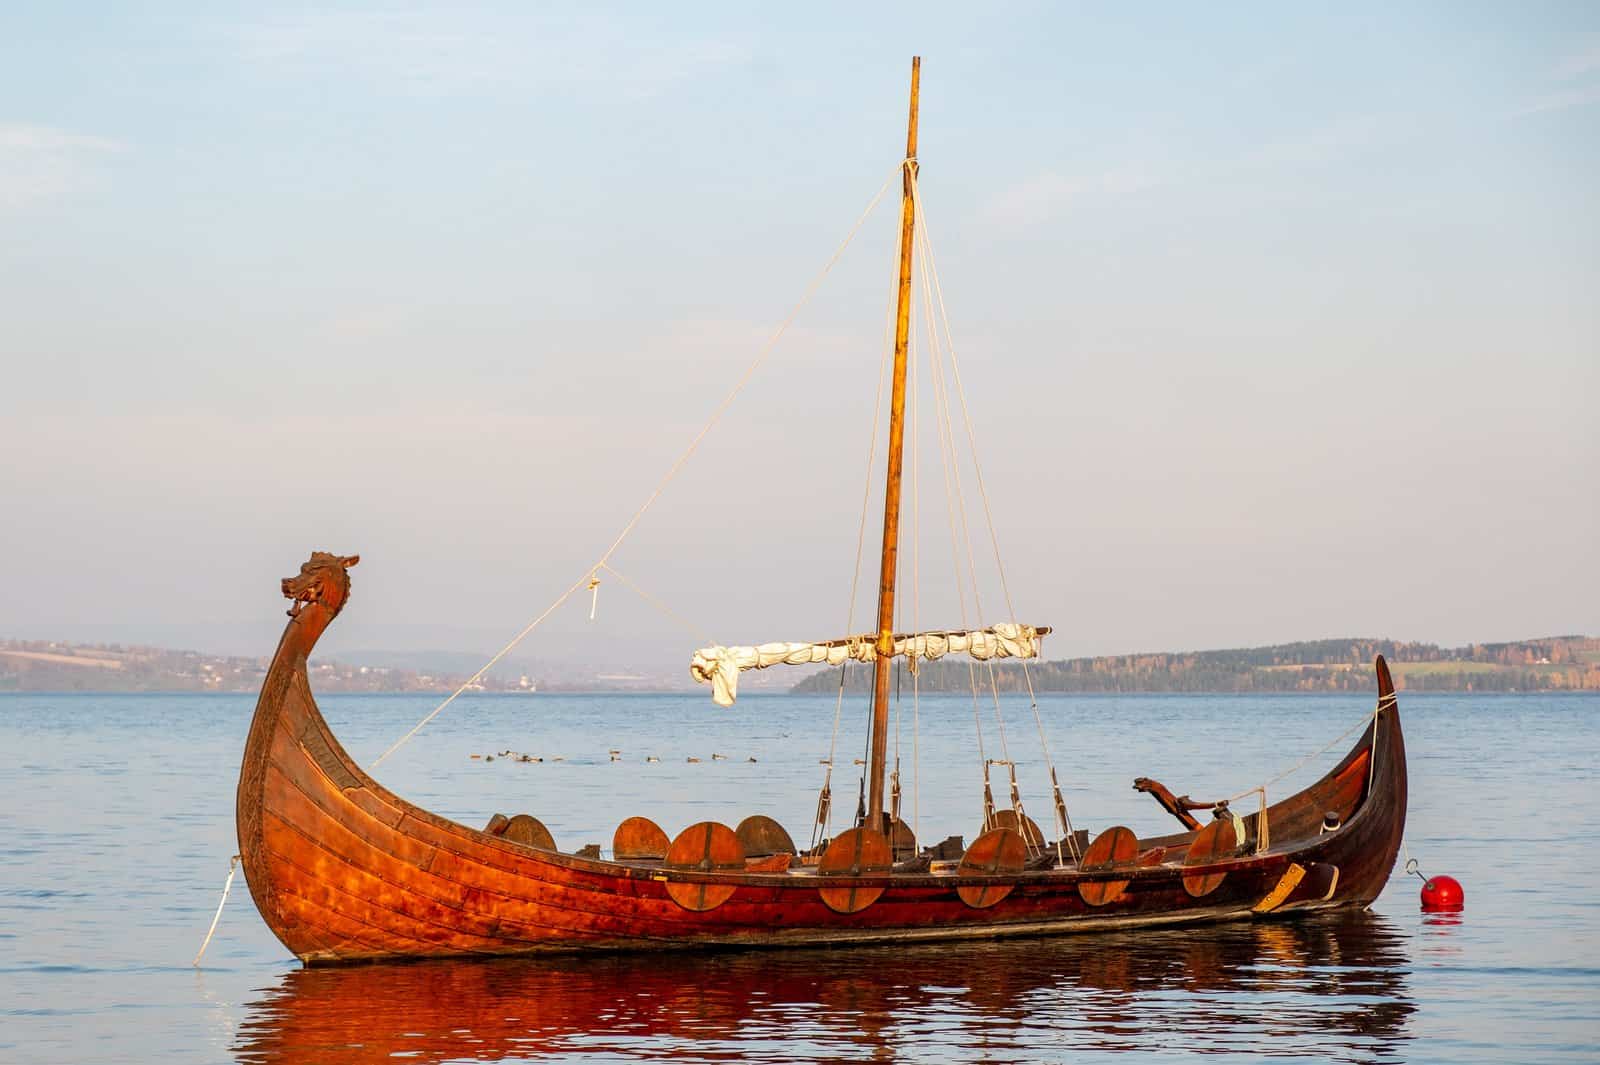 Vikings Facts for Kids - 5 Fascinating Facts about Vikings